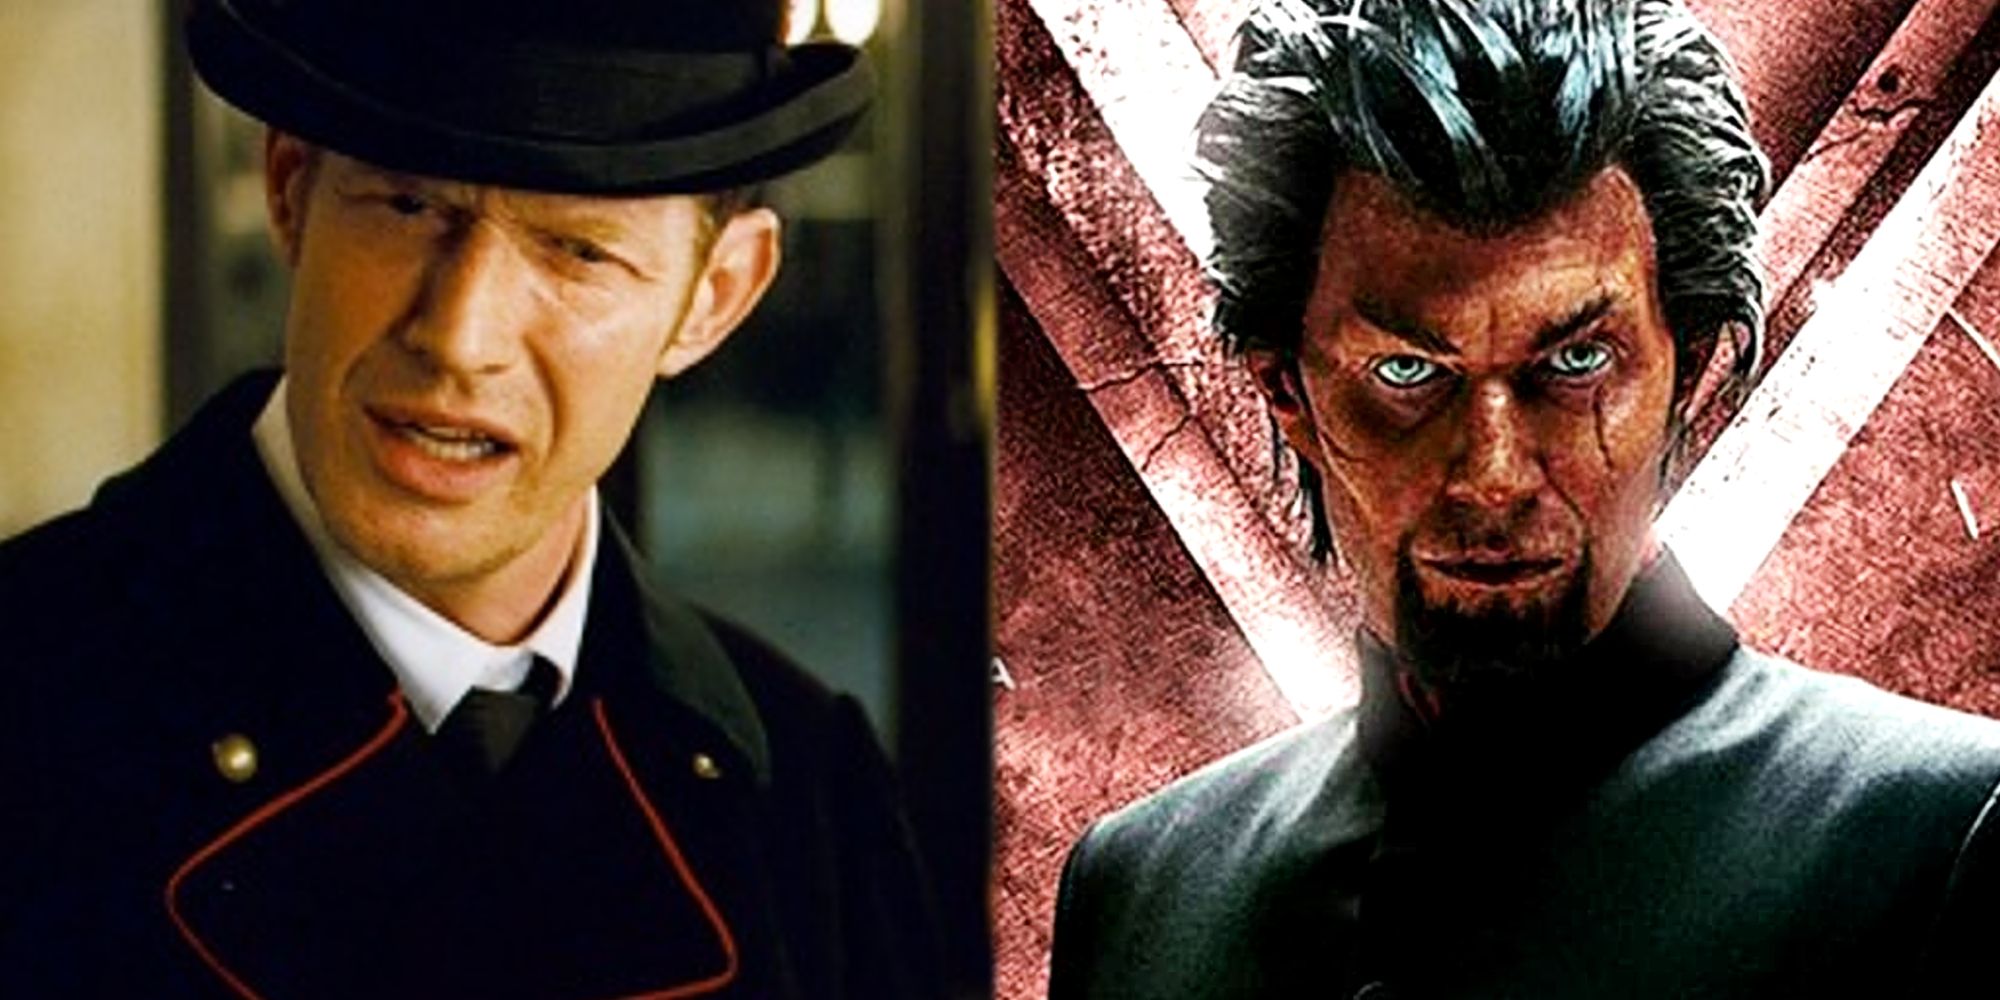 Jason Flemyng in Kick-Ass and as Azezel in X-Men First Class